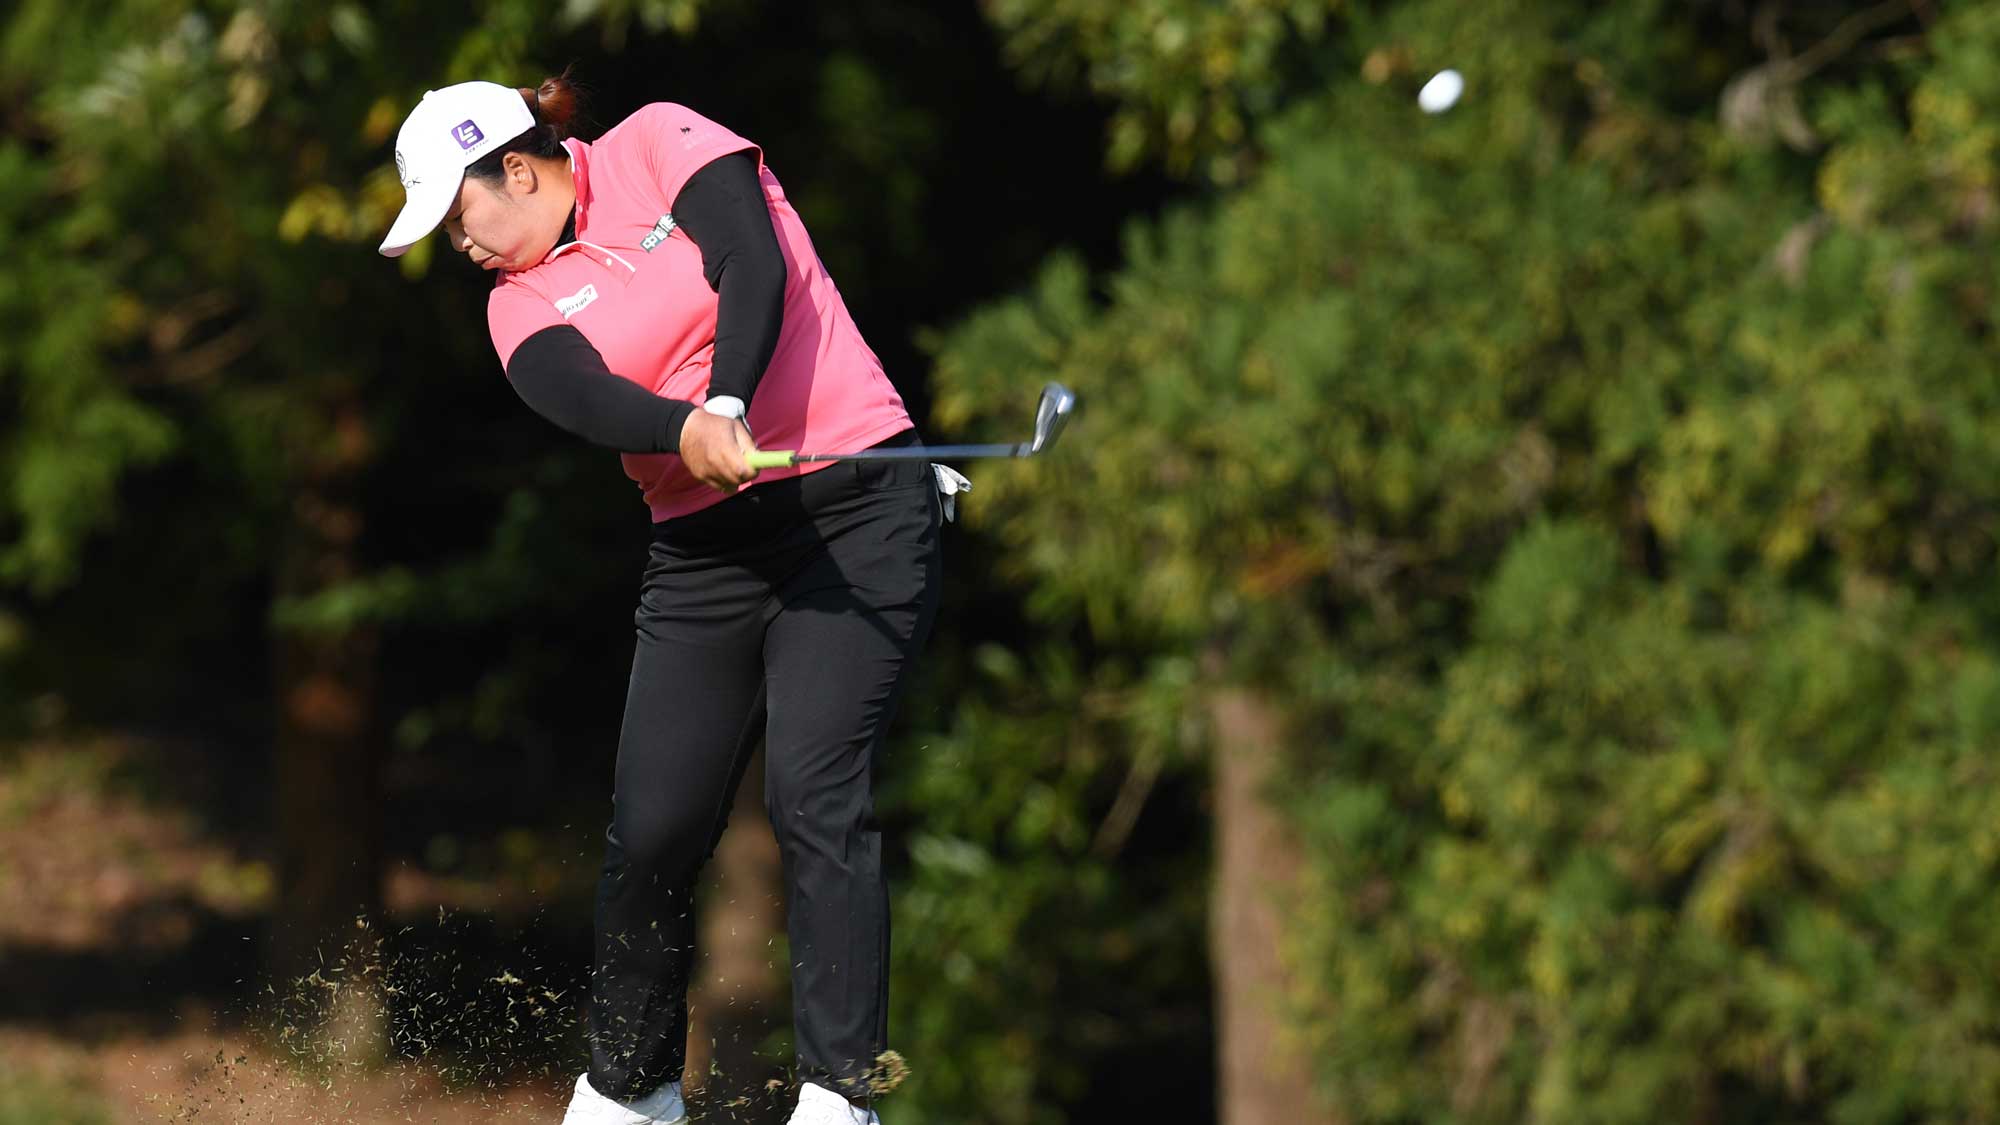 Shanshan Feng of China hits her second shot on the 14th hole during the final round of the TOTO Japan Classic